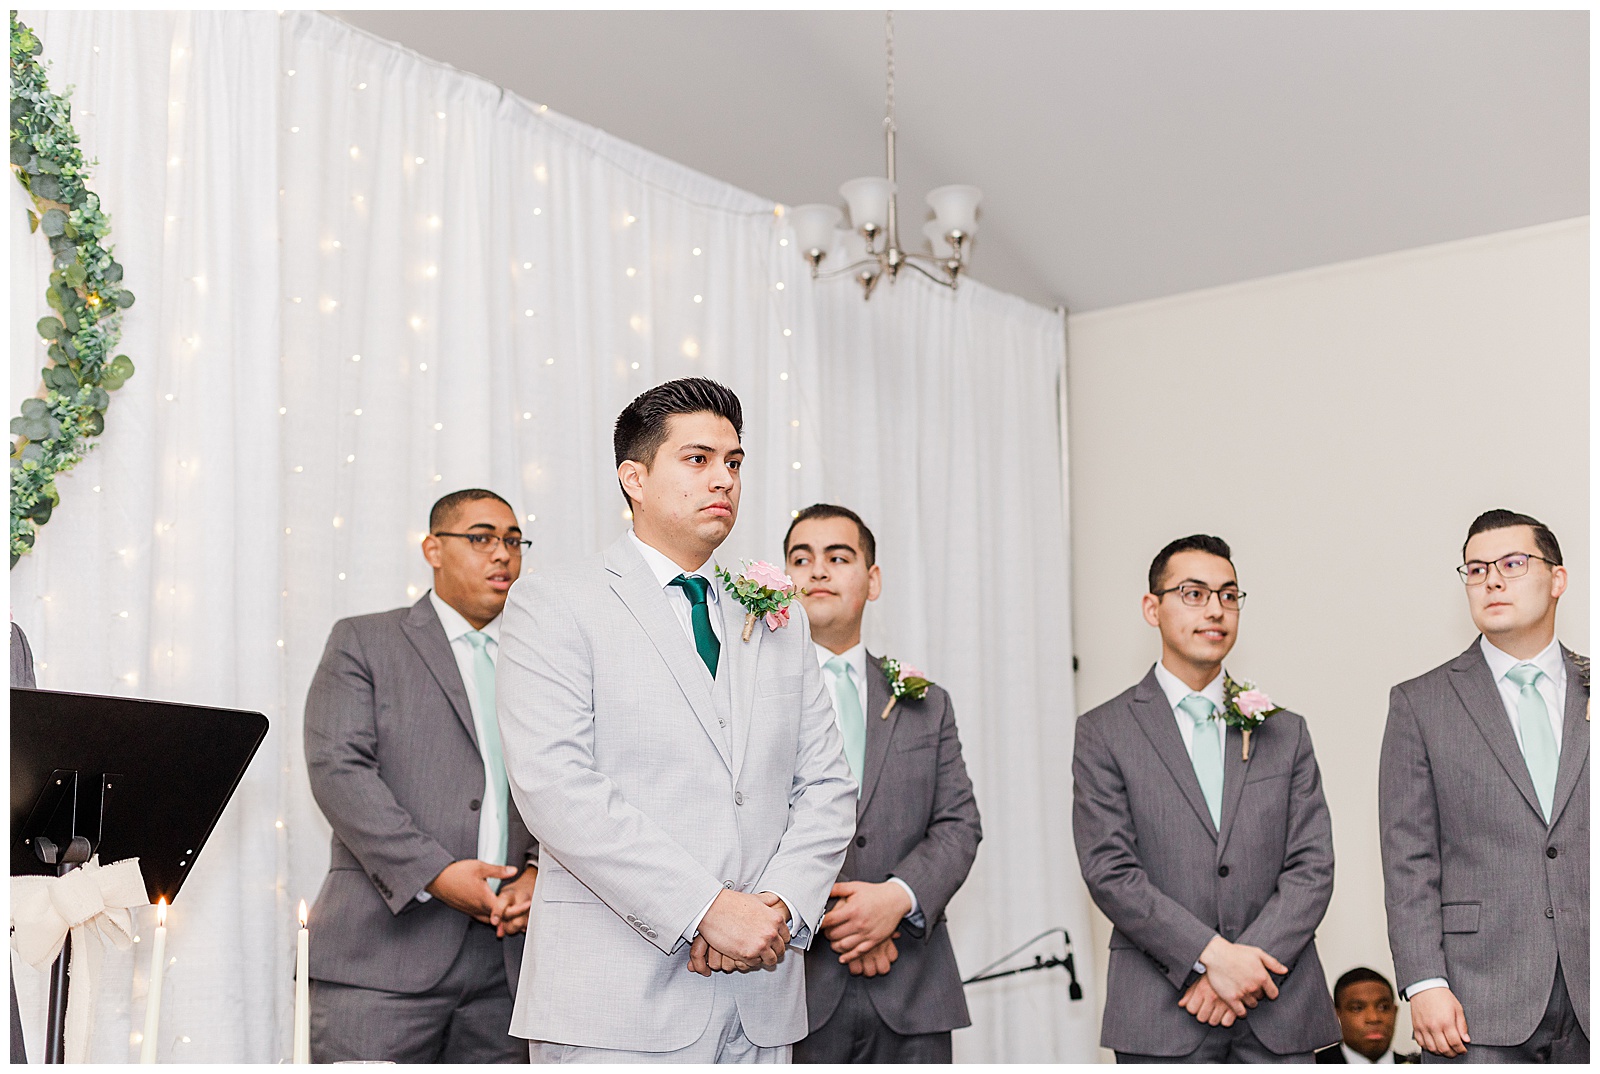 Grooms reaction to seeing bride for the first time